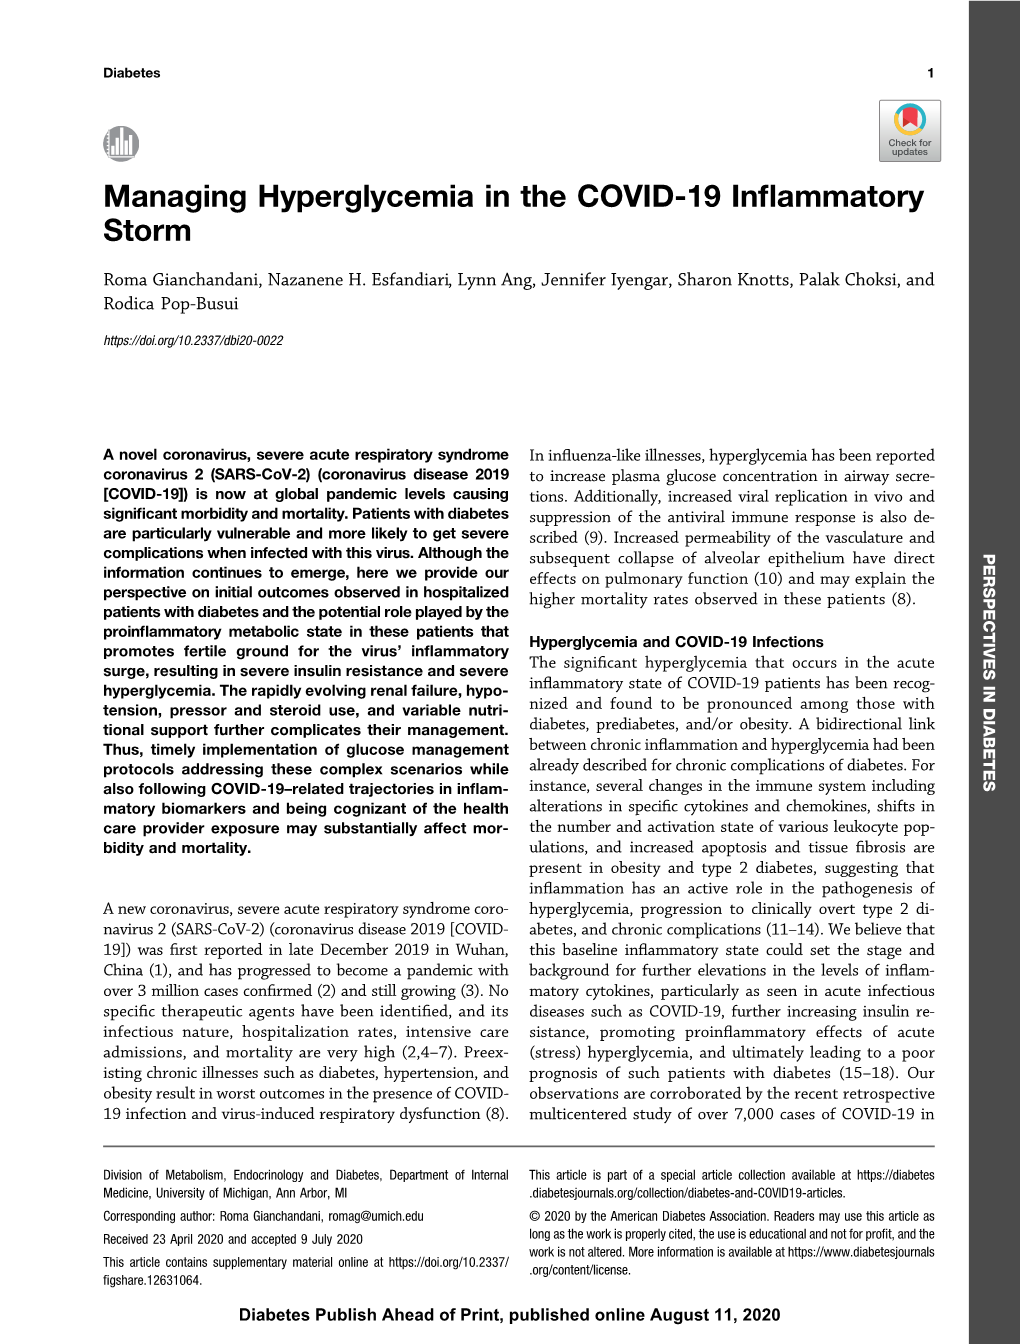 Managing Hyperglycemia in the COVID-19 Inflammatory Storm